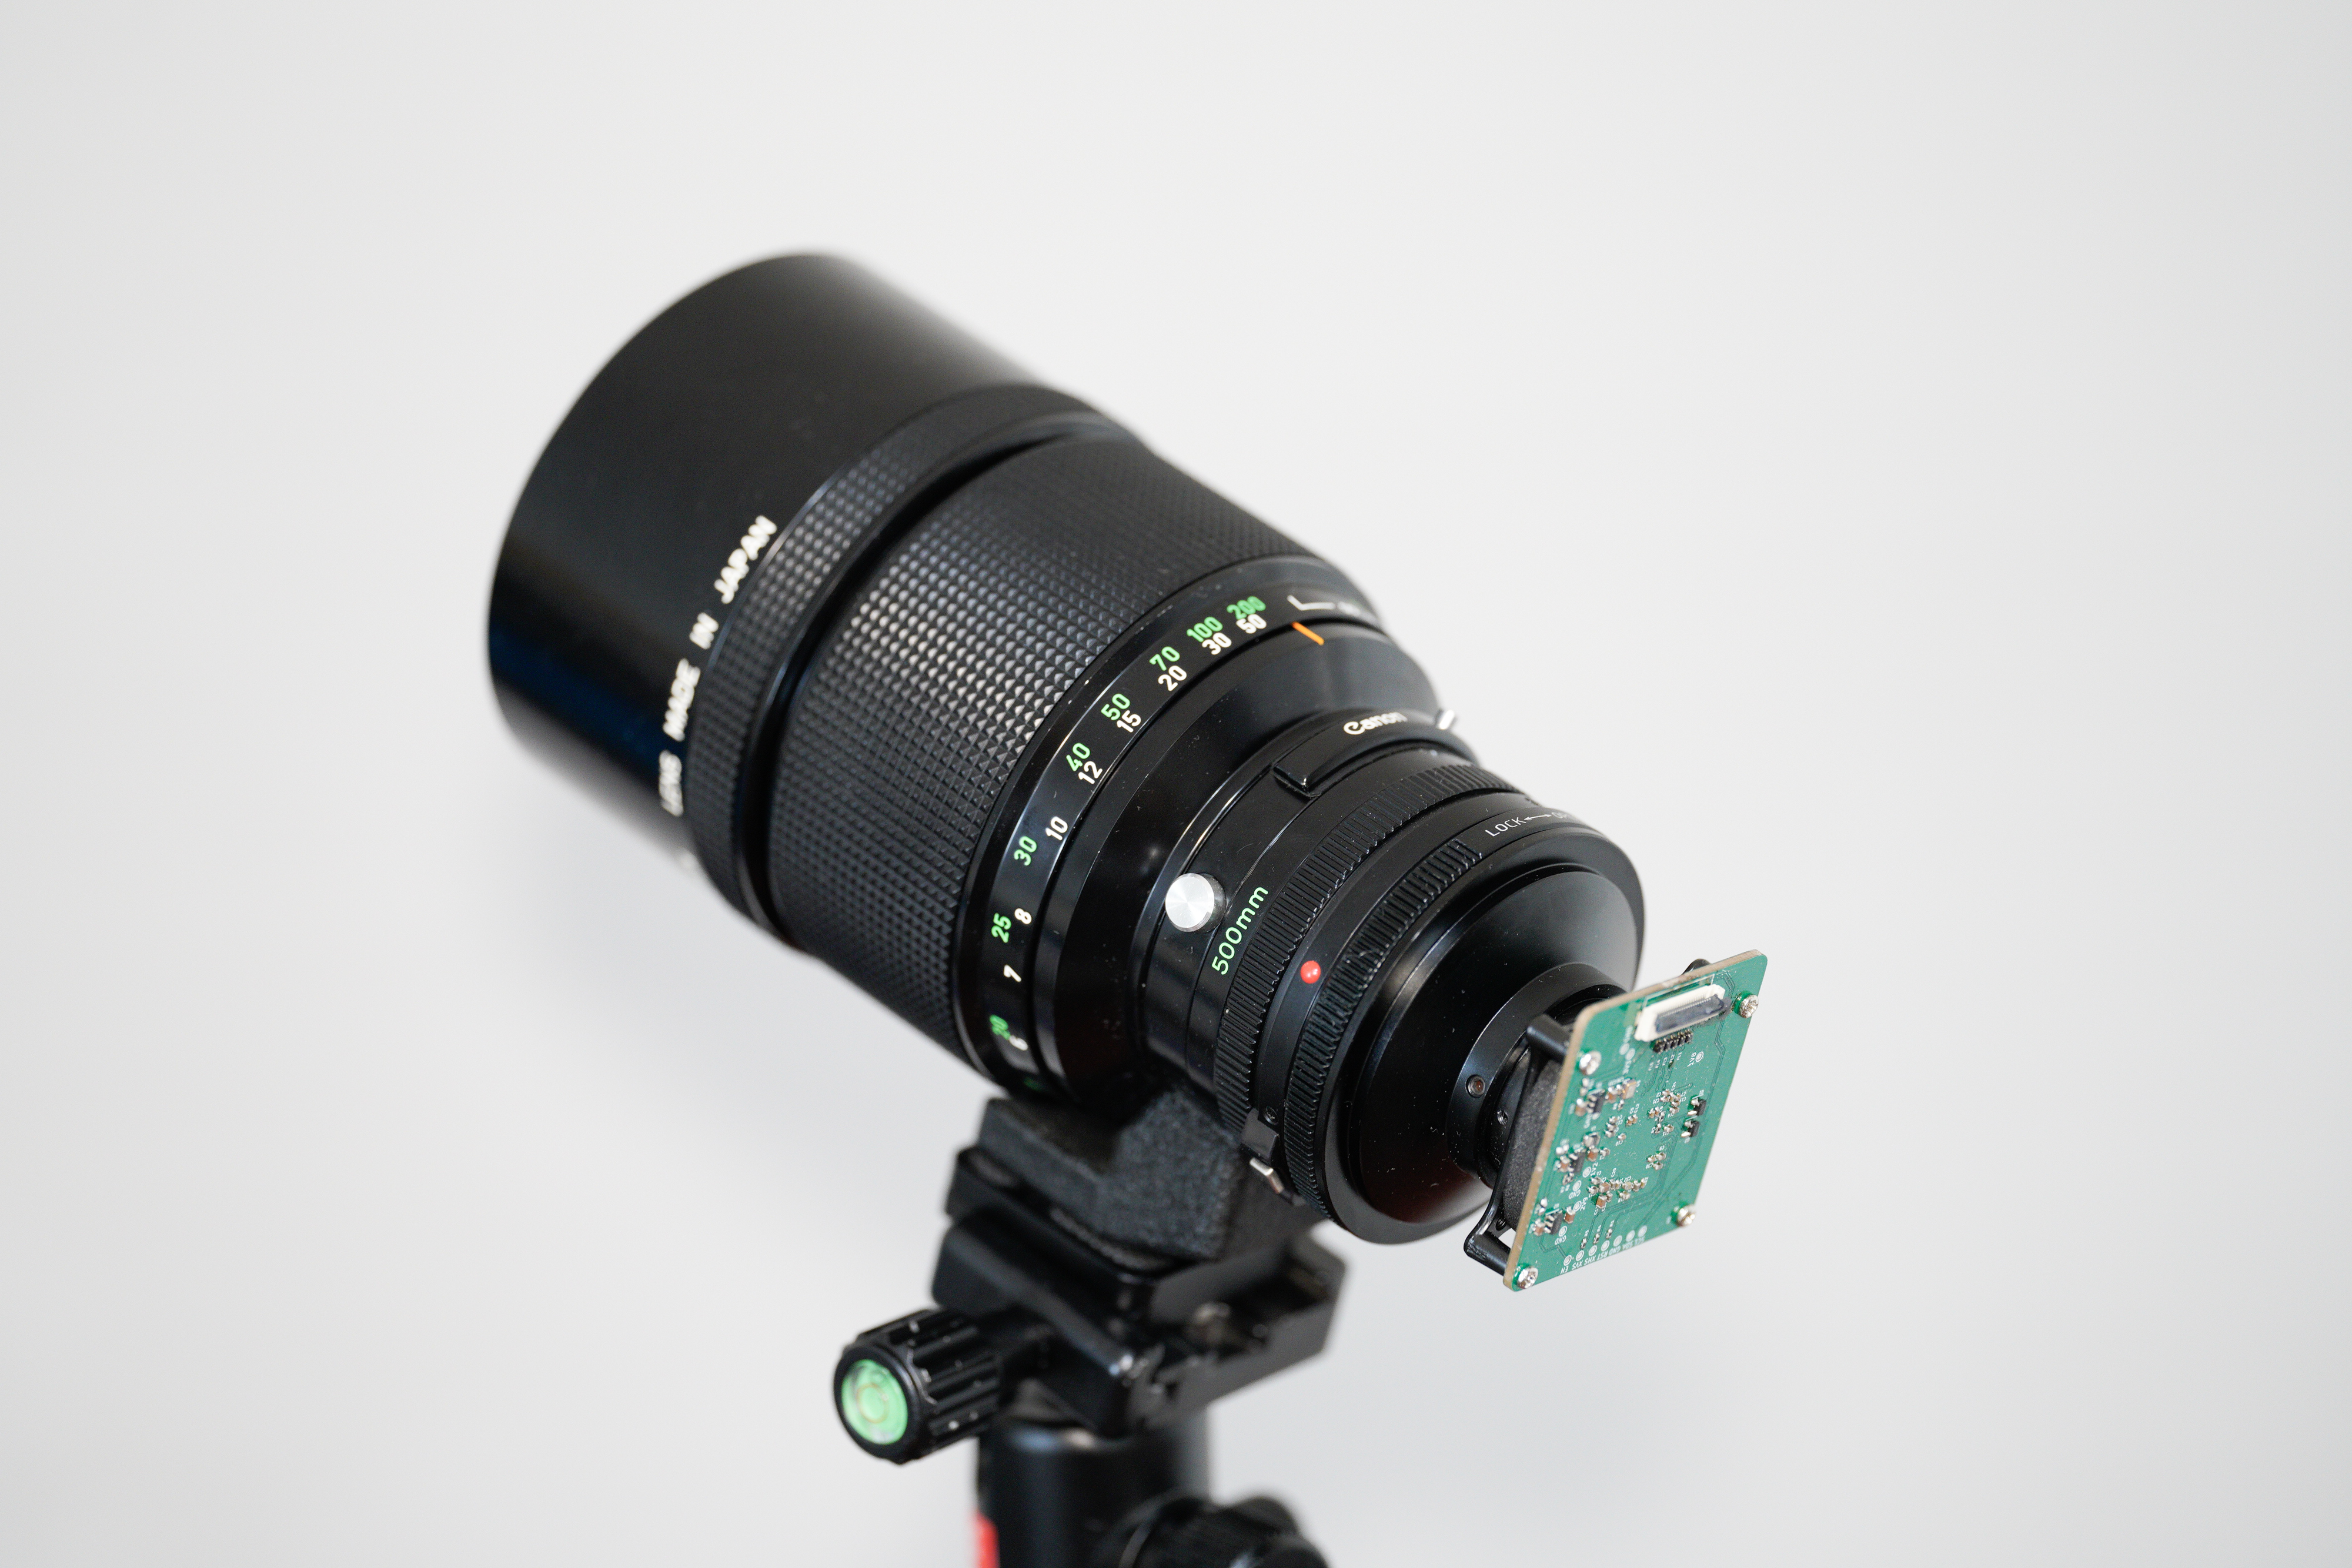 Image of the 500mm Lens